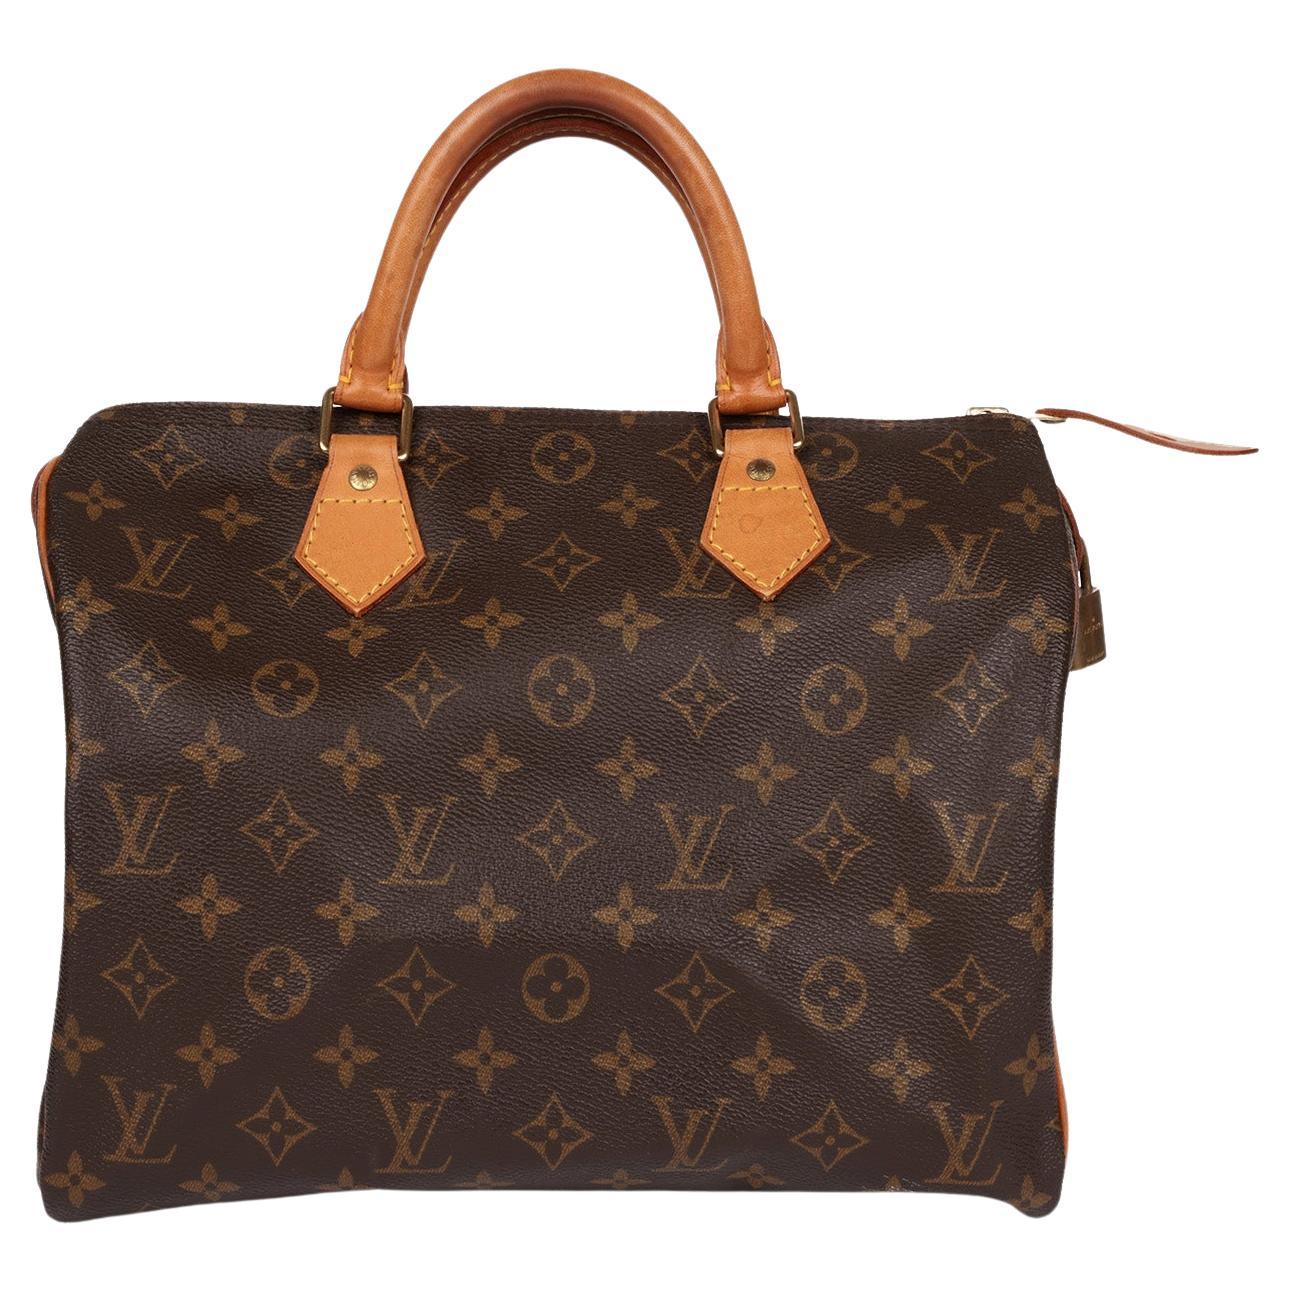 Where is the date code on a Louis Vuitton bag?